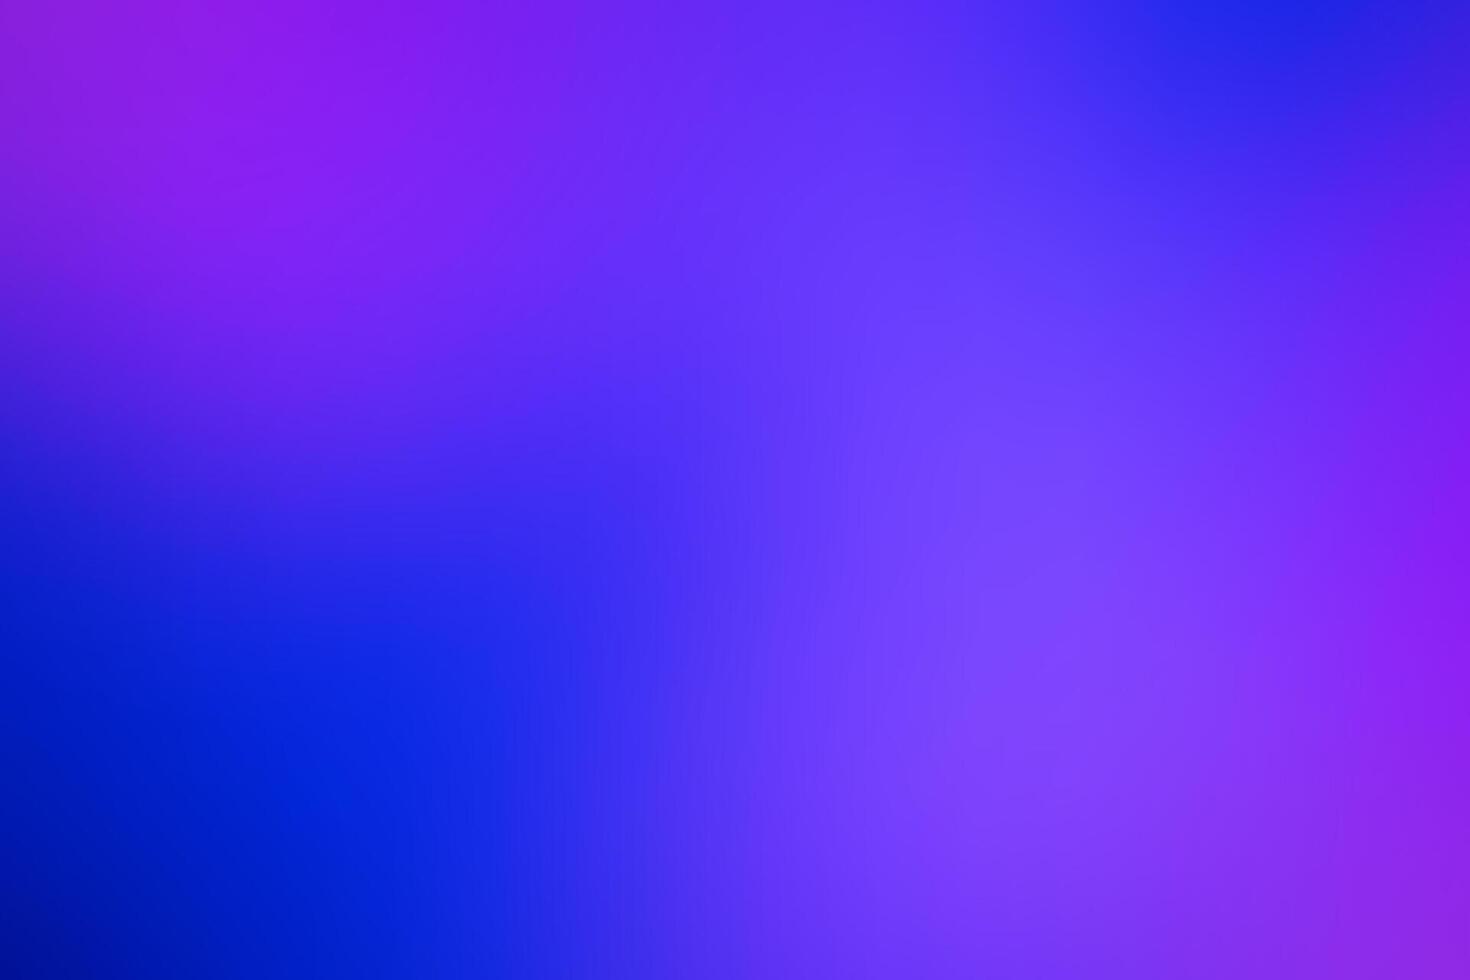 Modern Colorful Blurry Wallpaper Background for Trendy Designs vector